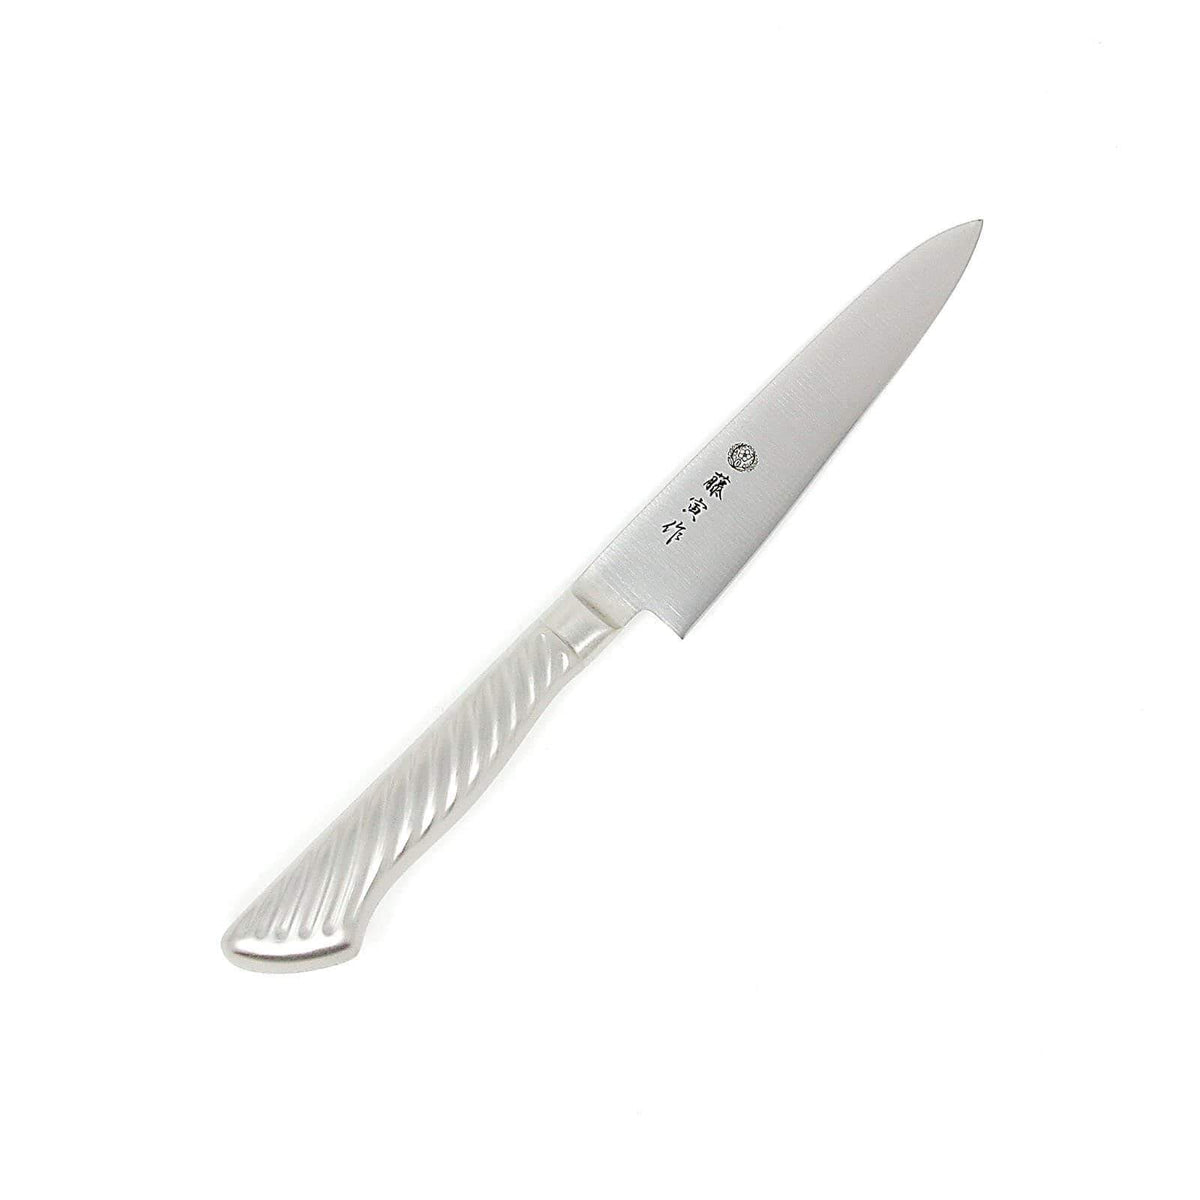 Tojiro Fujitora DP 3-Layer Petty Knife with Stainless Steel Handle Petty Knives